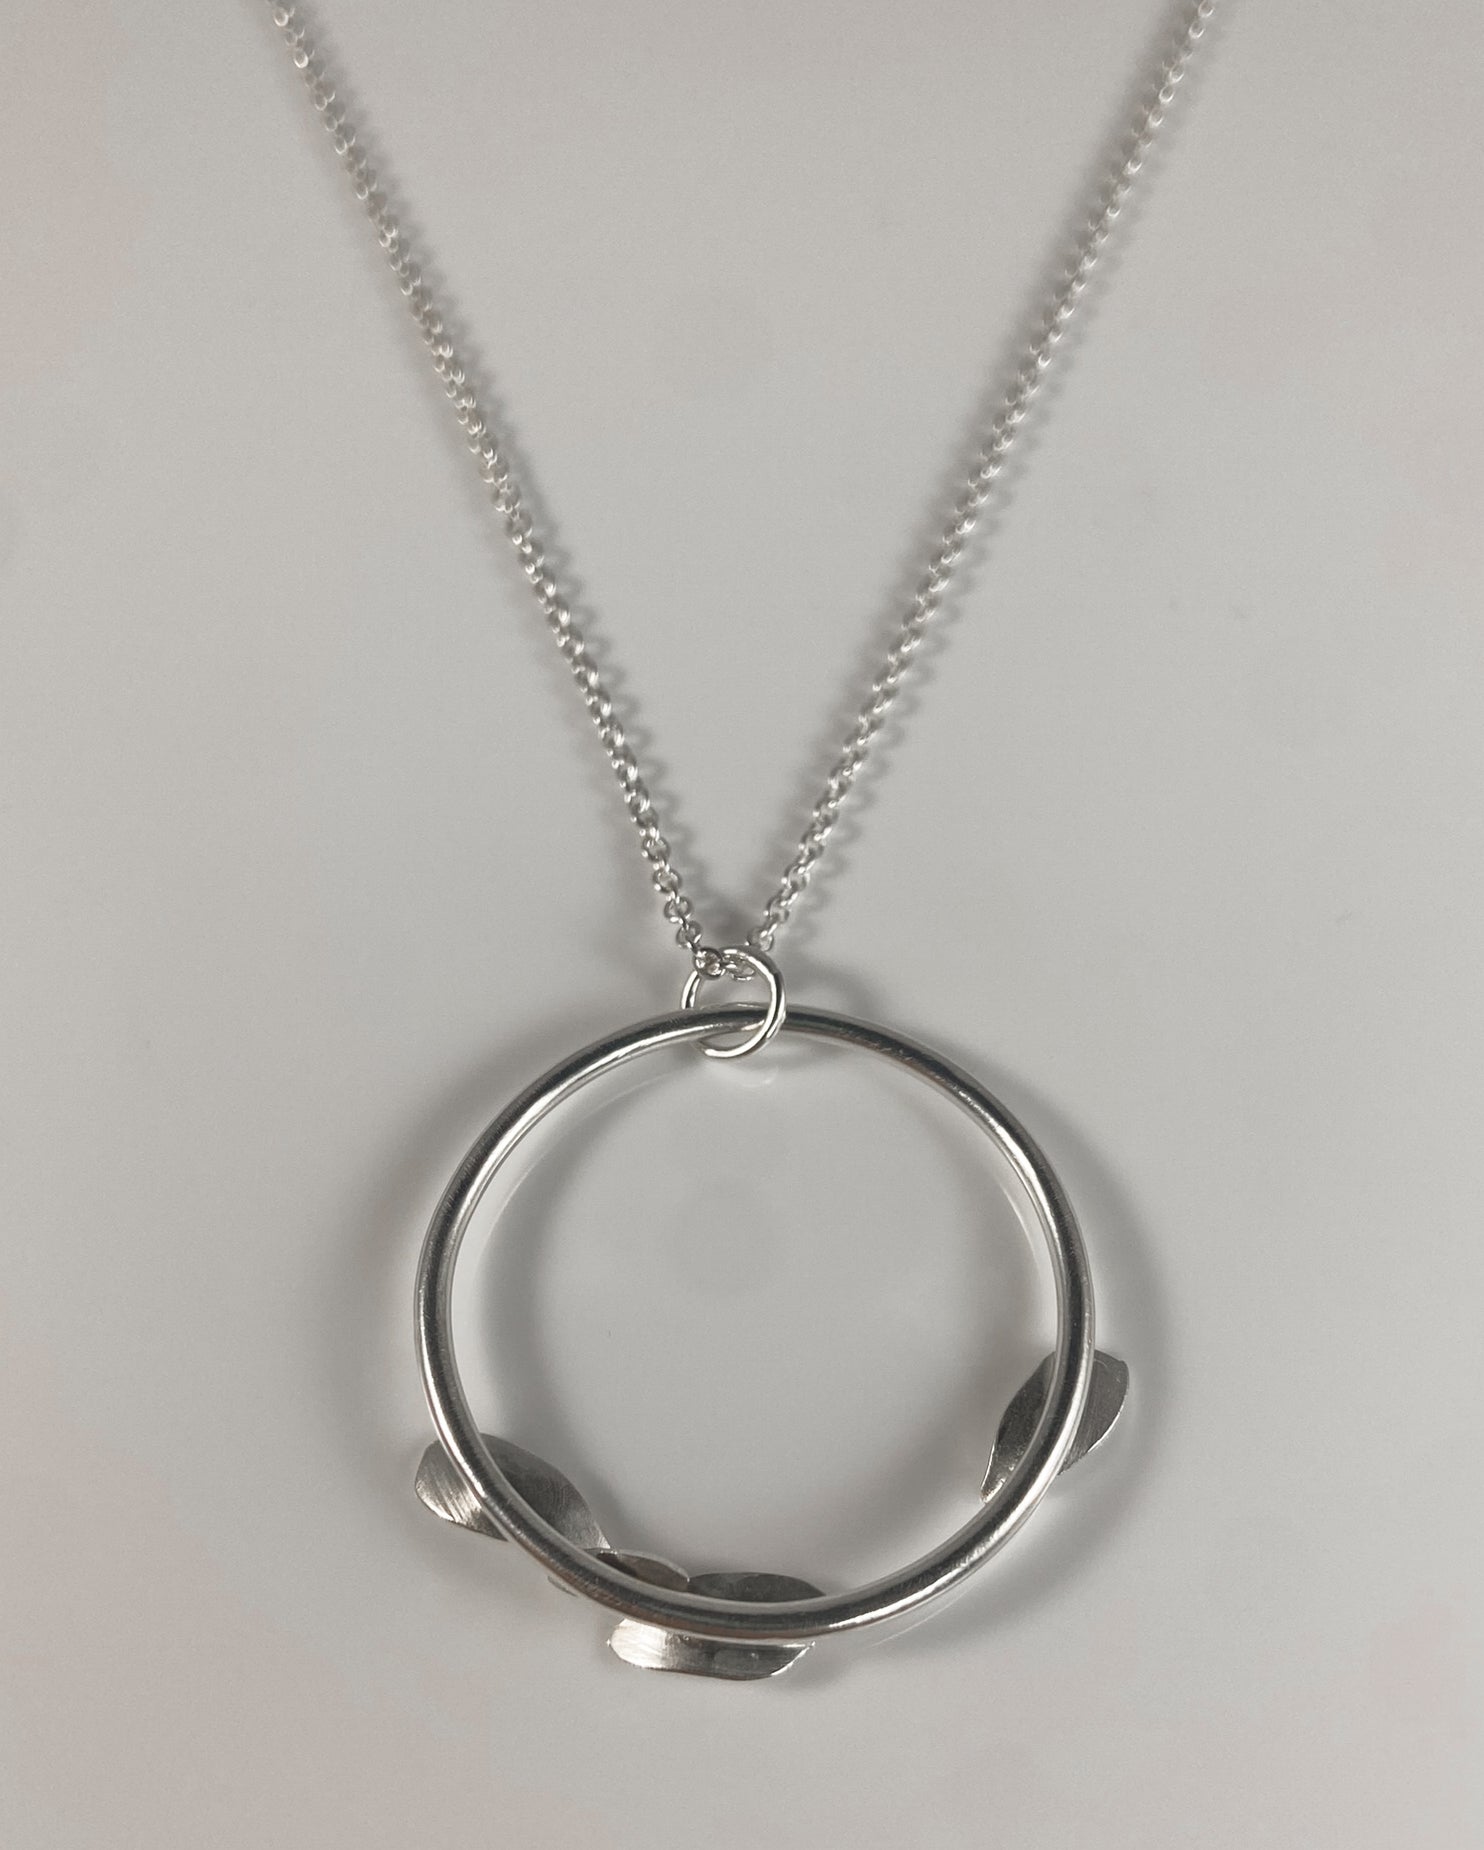 Abstract Sterling Silver Circle Pendant with Petals